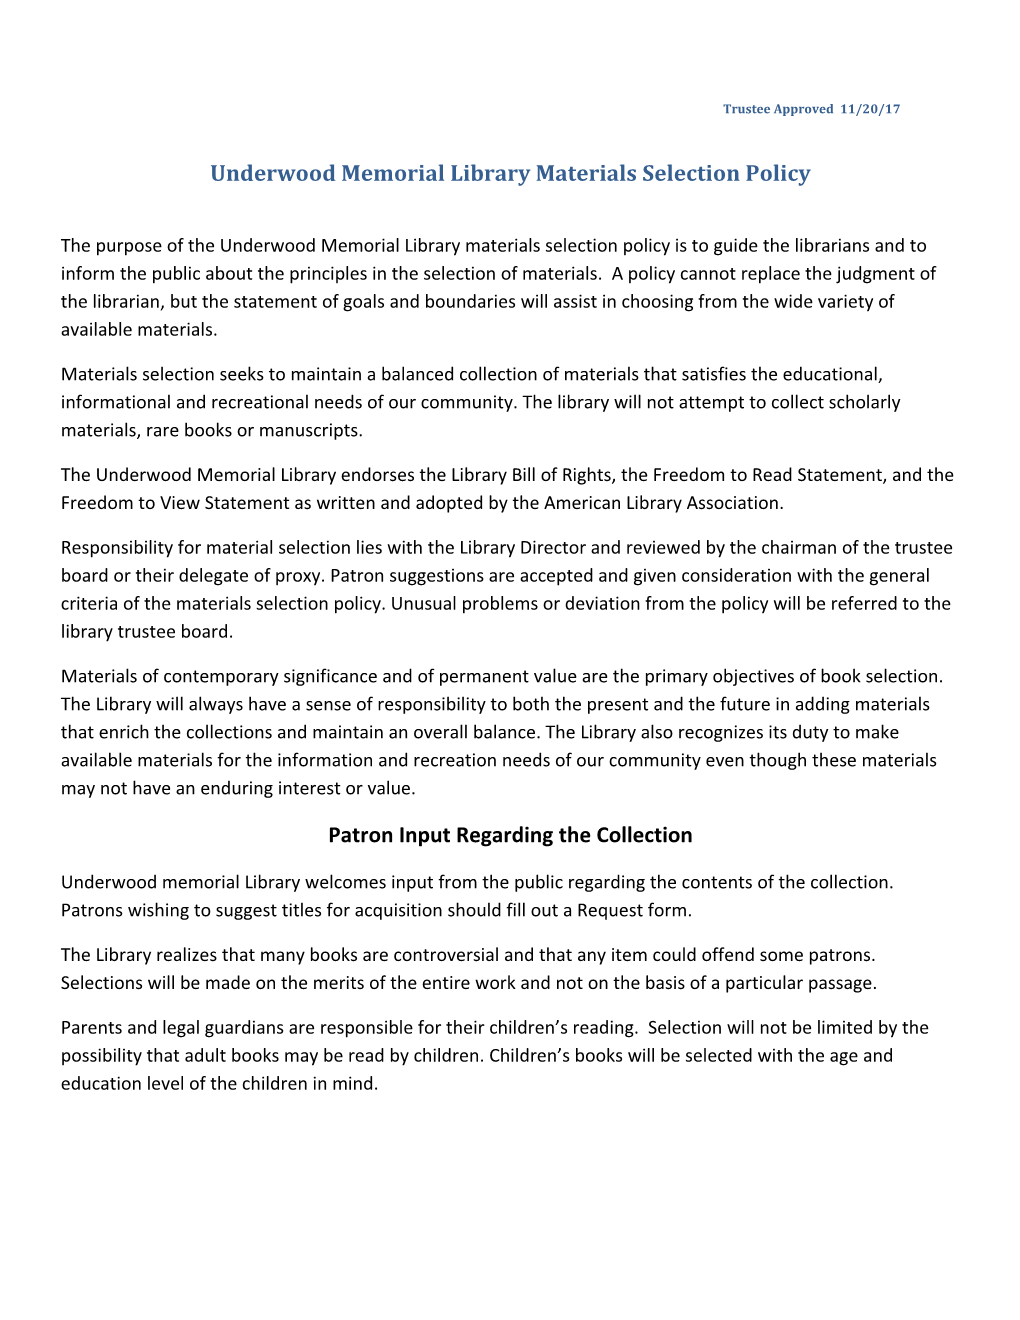 Underwood Memorial Library Materials Selection Policy